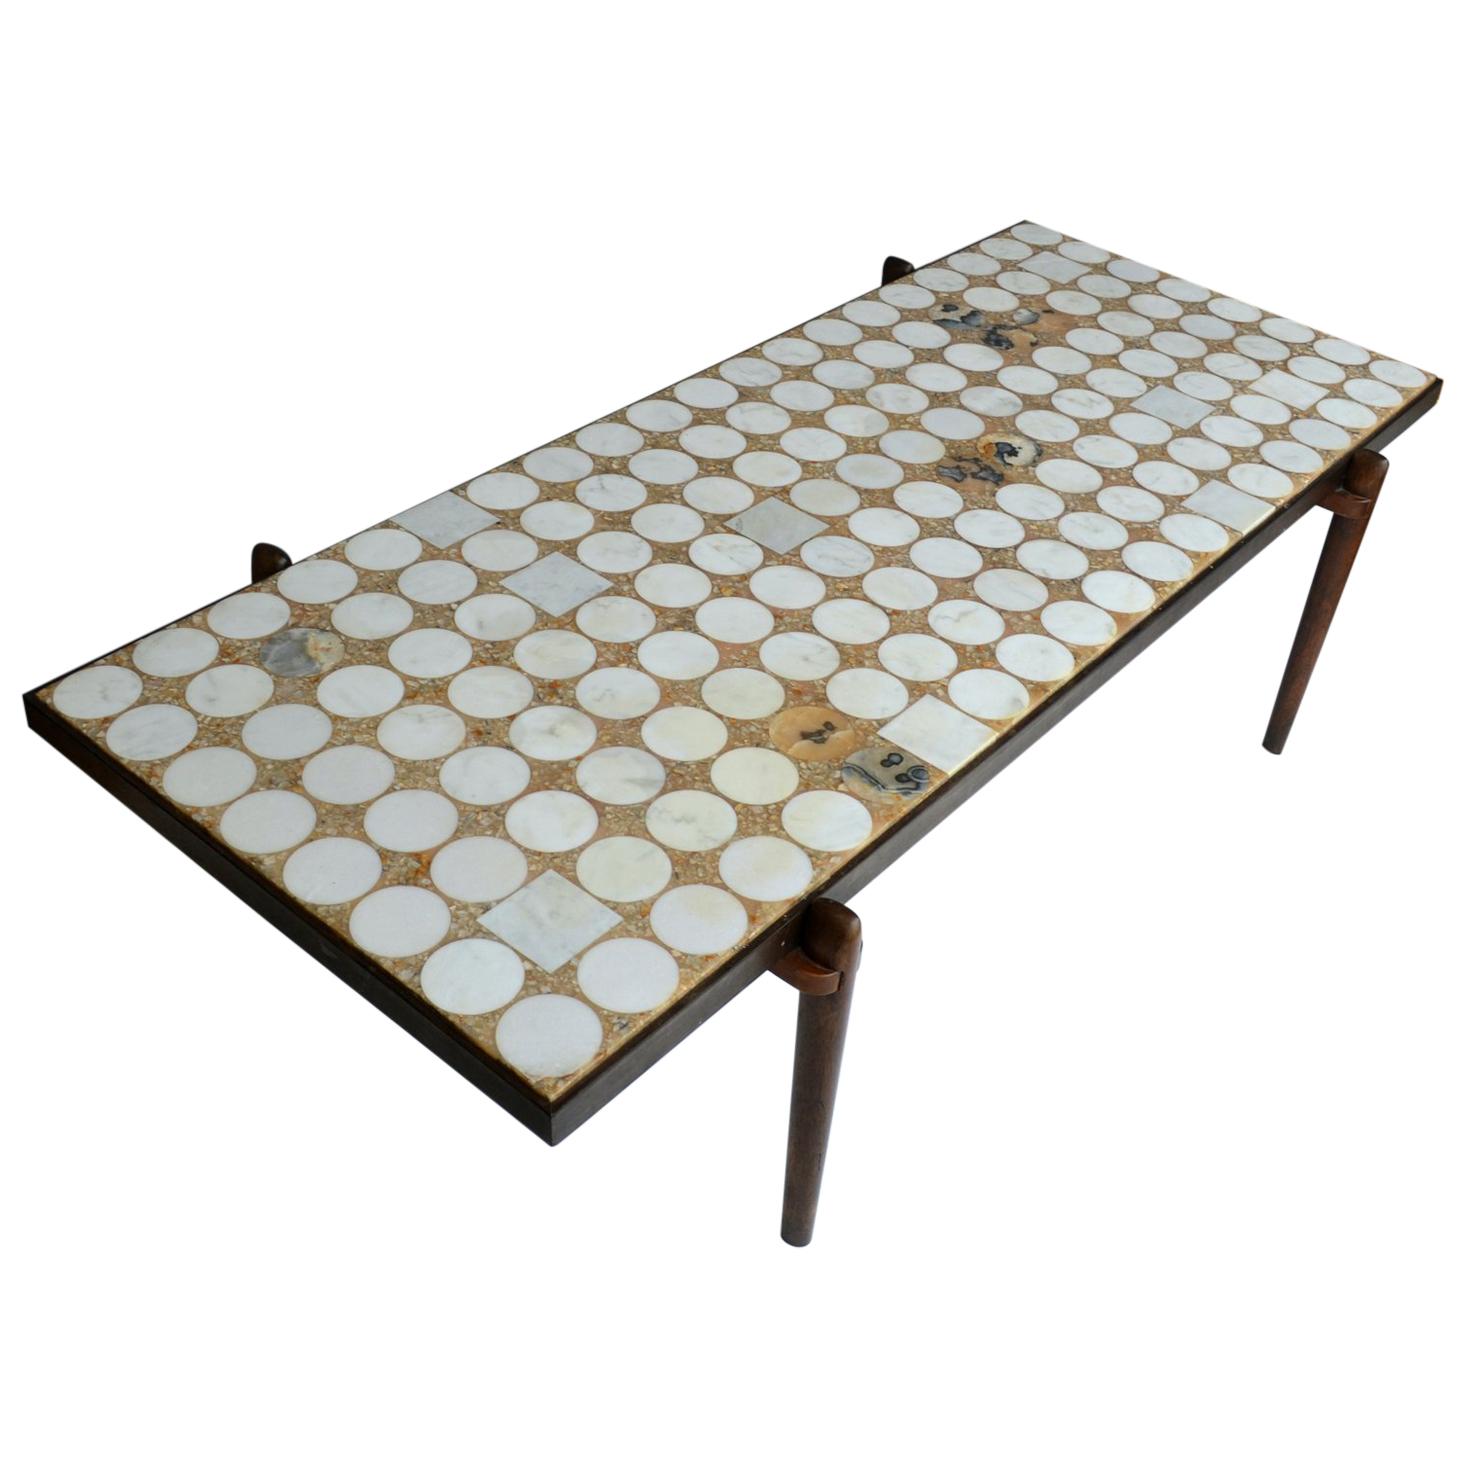 1960s Rectangular Coffee Table by Heinz Lilienthal Mosaic in Carrara and Onyx